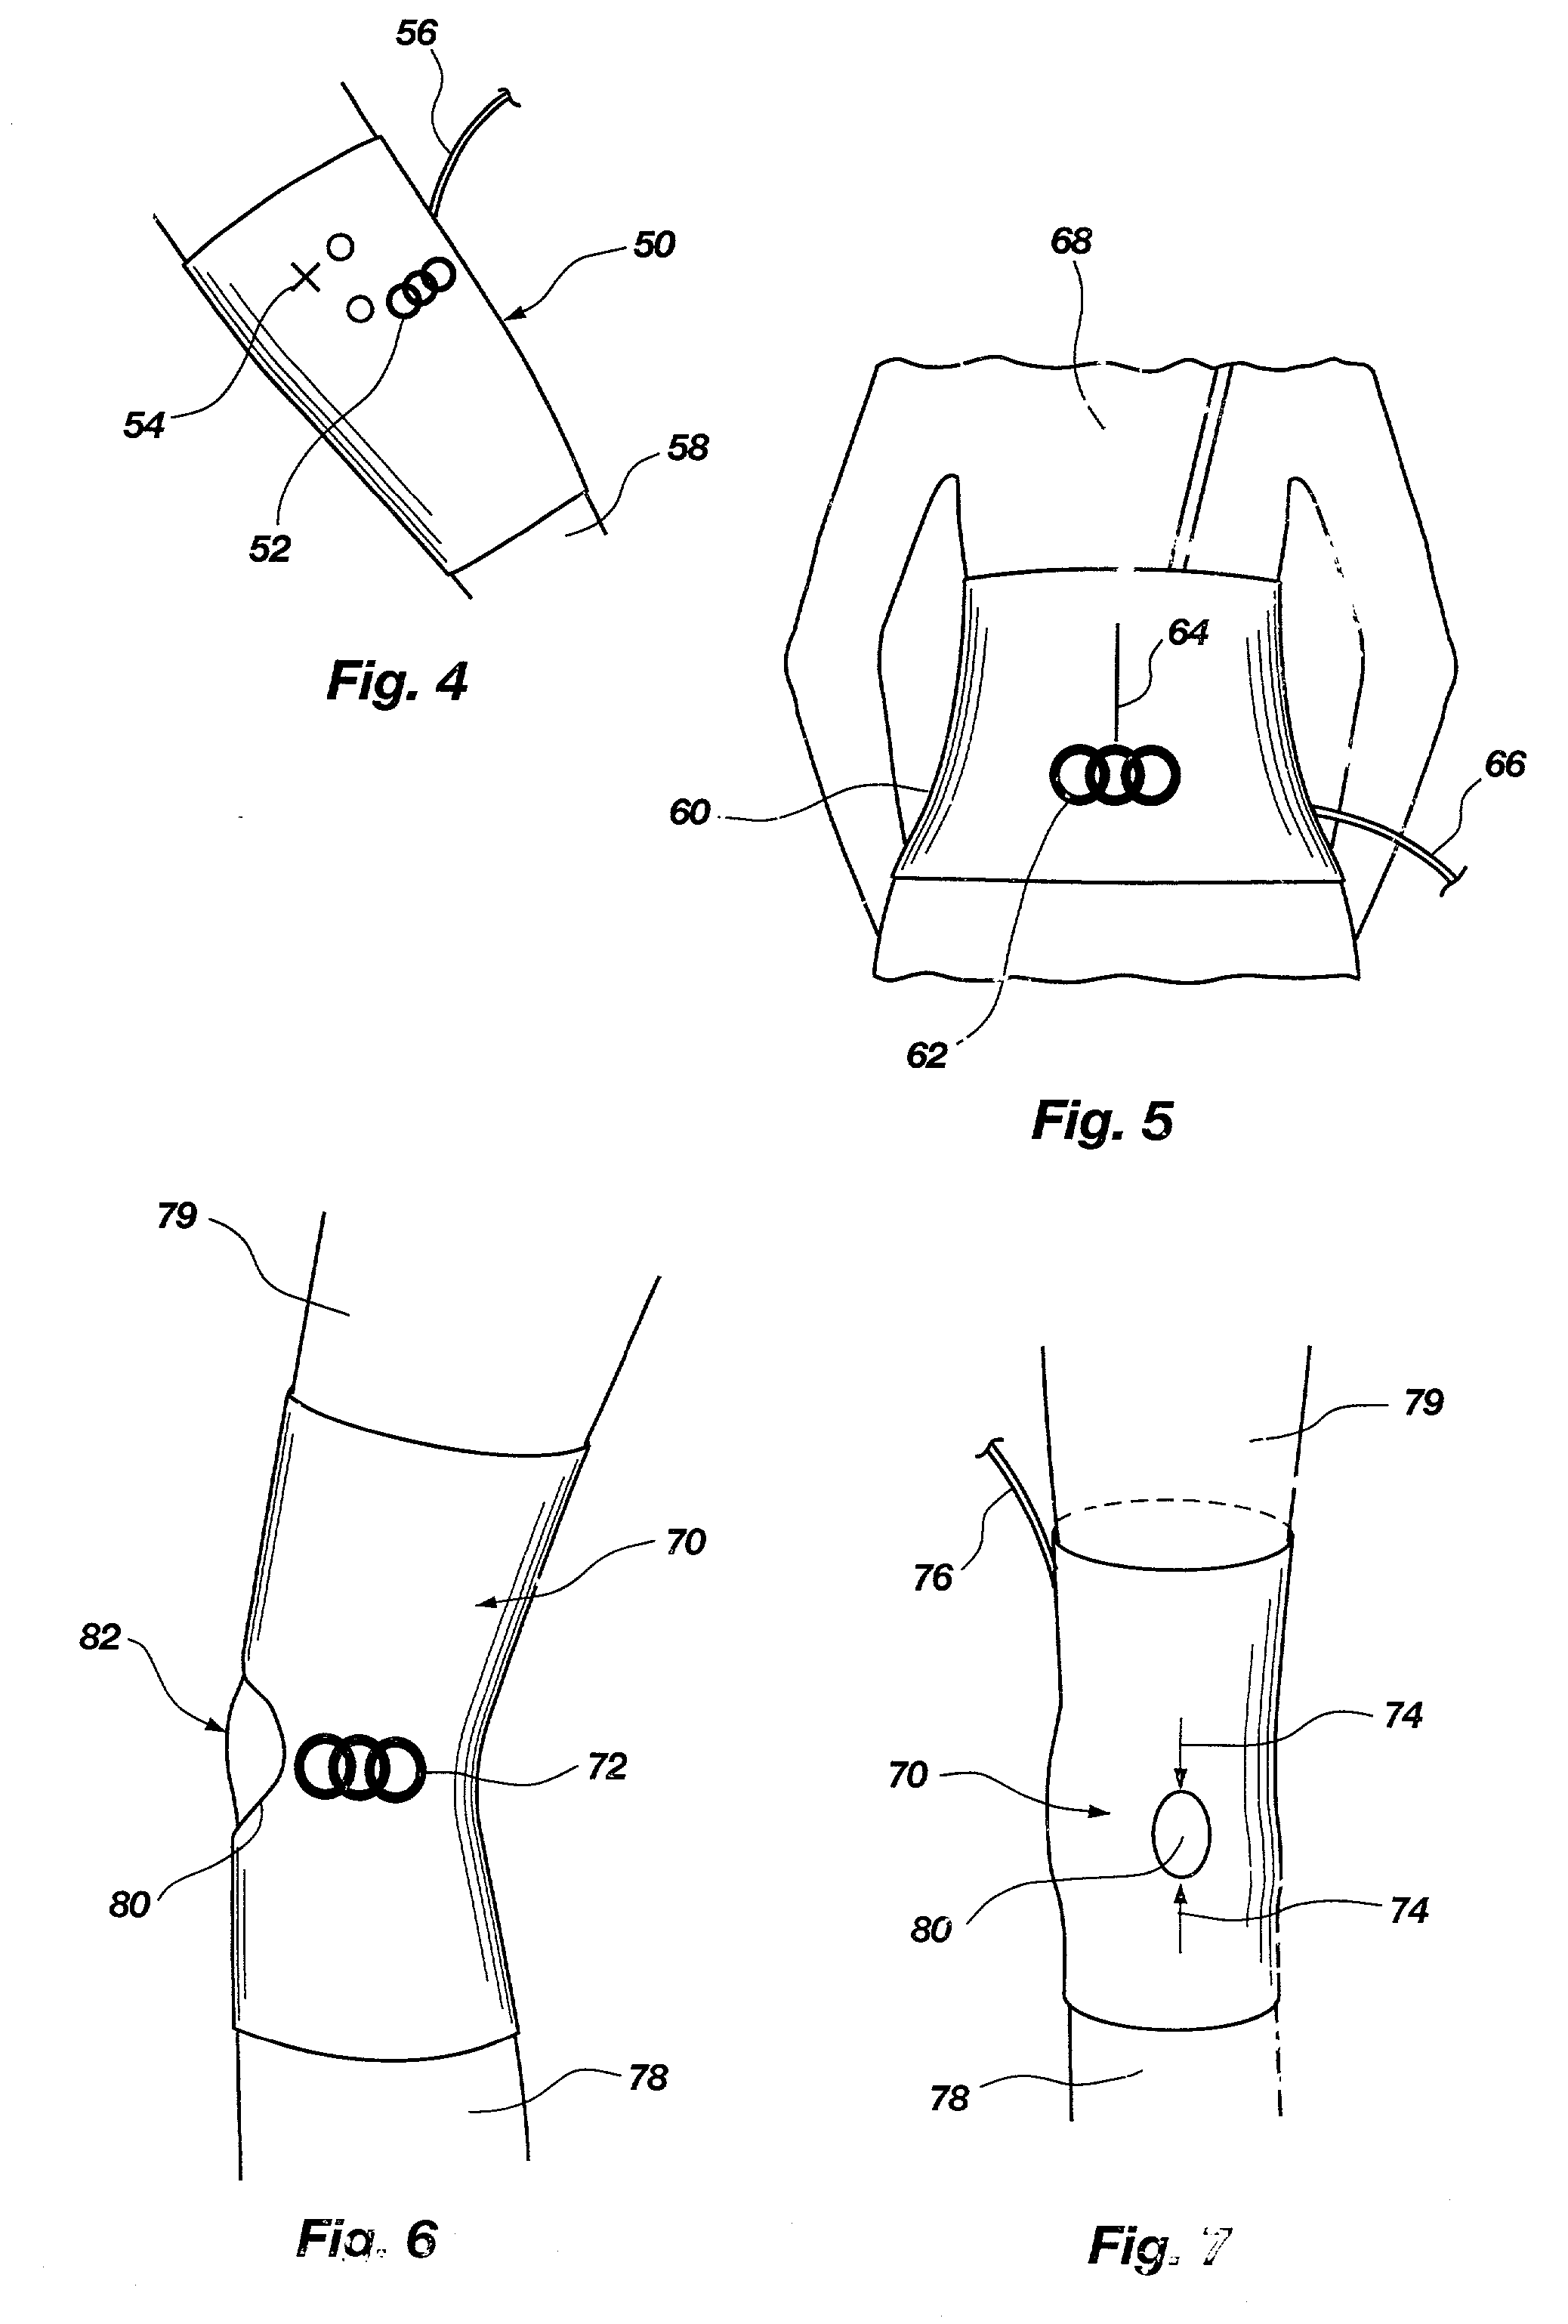 Method and apparatus for electromagnetic stimulation of nerve, muscle, and body tissues